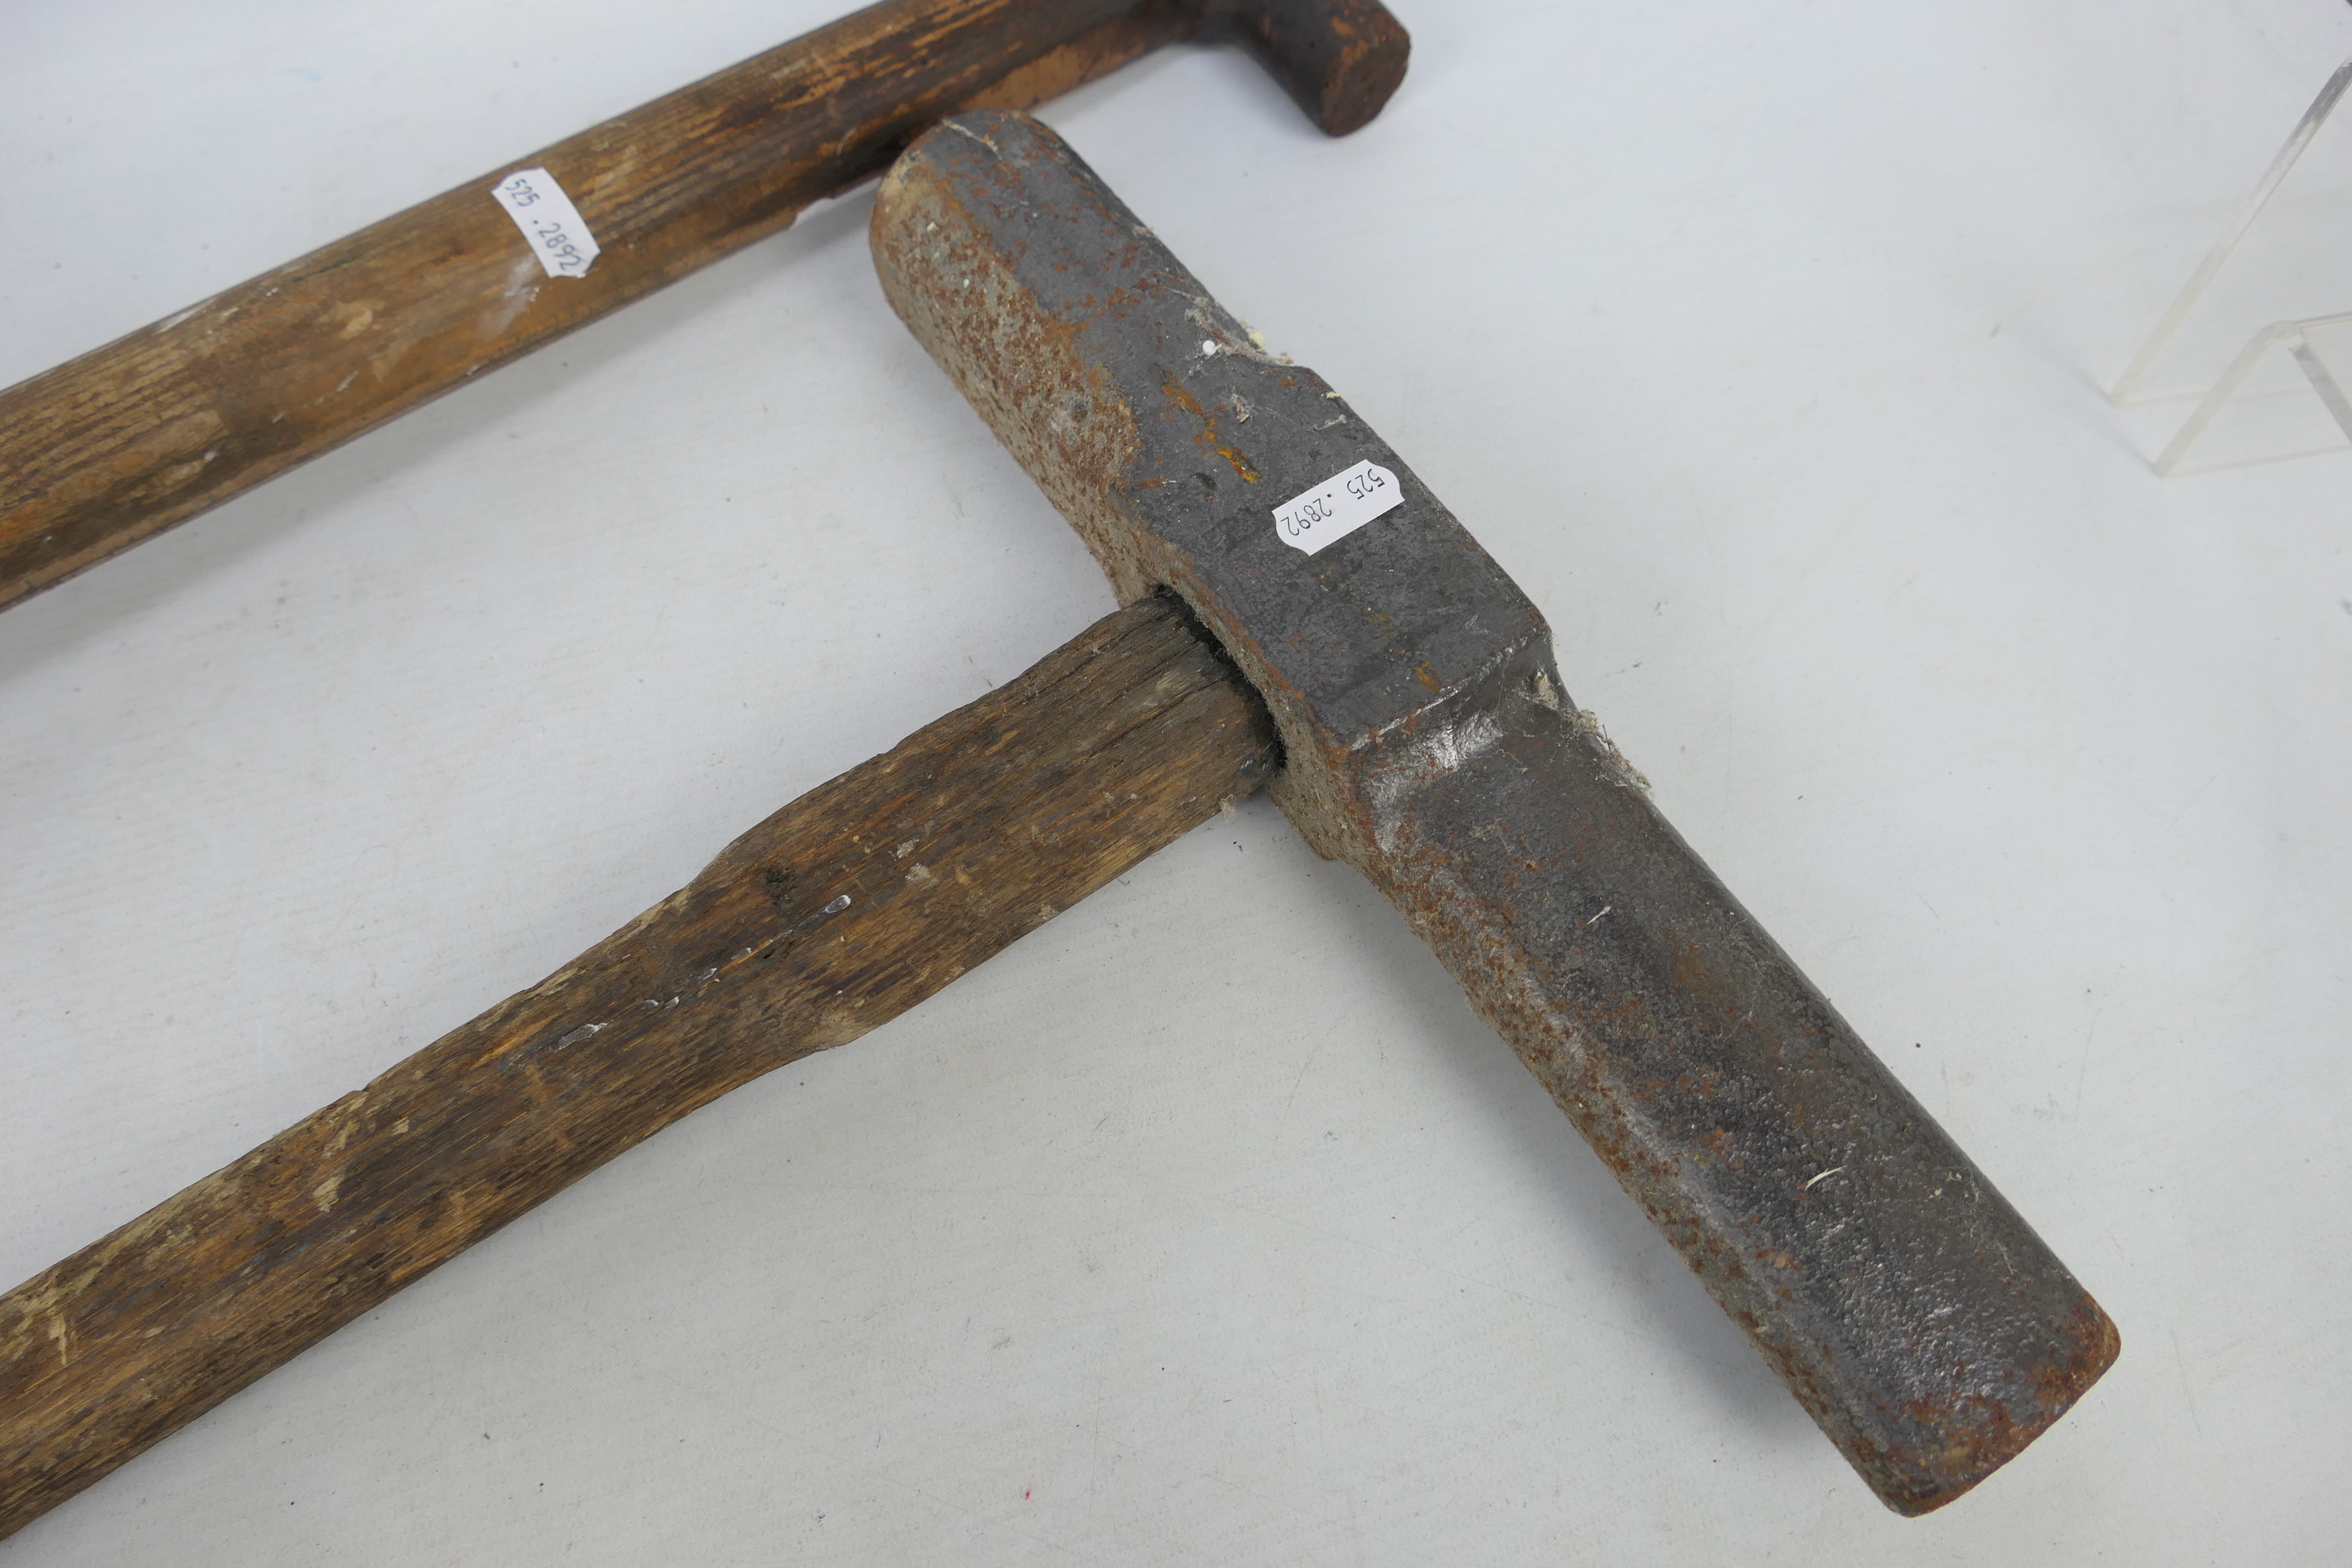 A vintage firing shovel and platelayer's keying hammer (handle 85 cm length). - Image 2 of 4